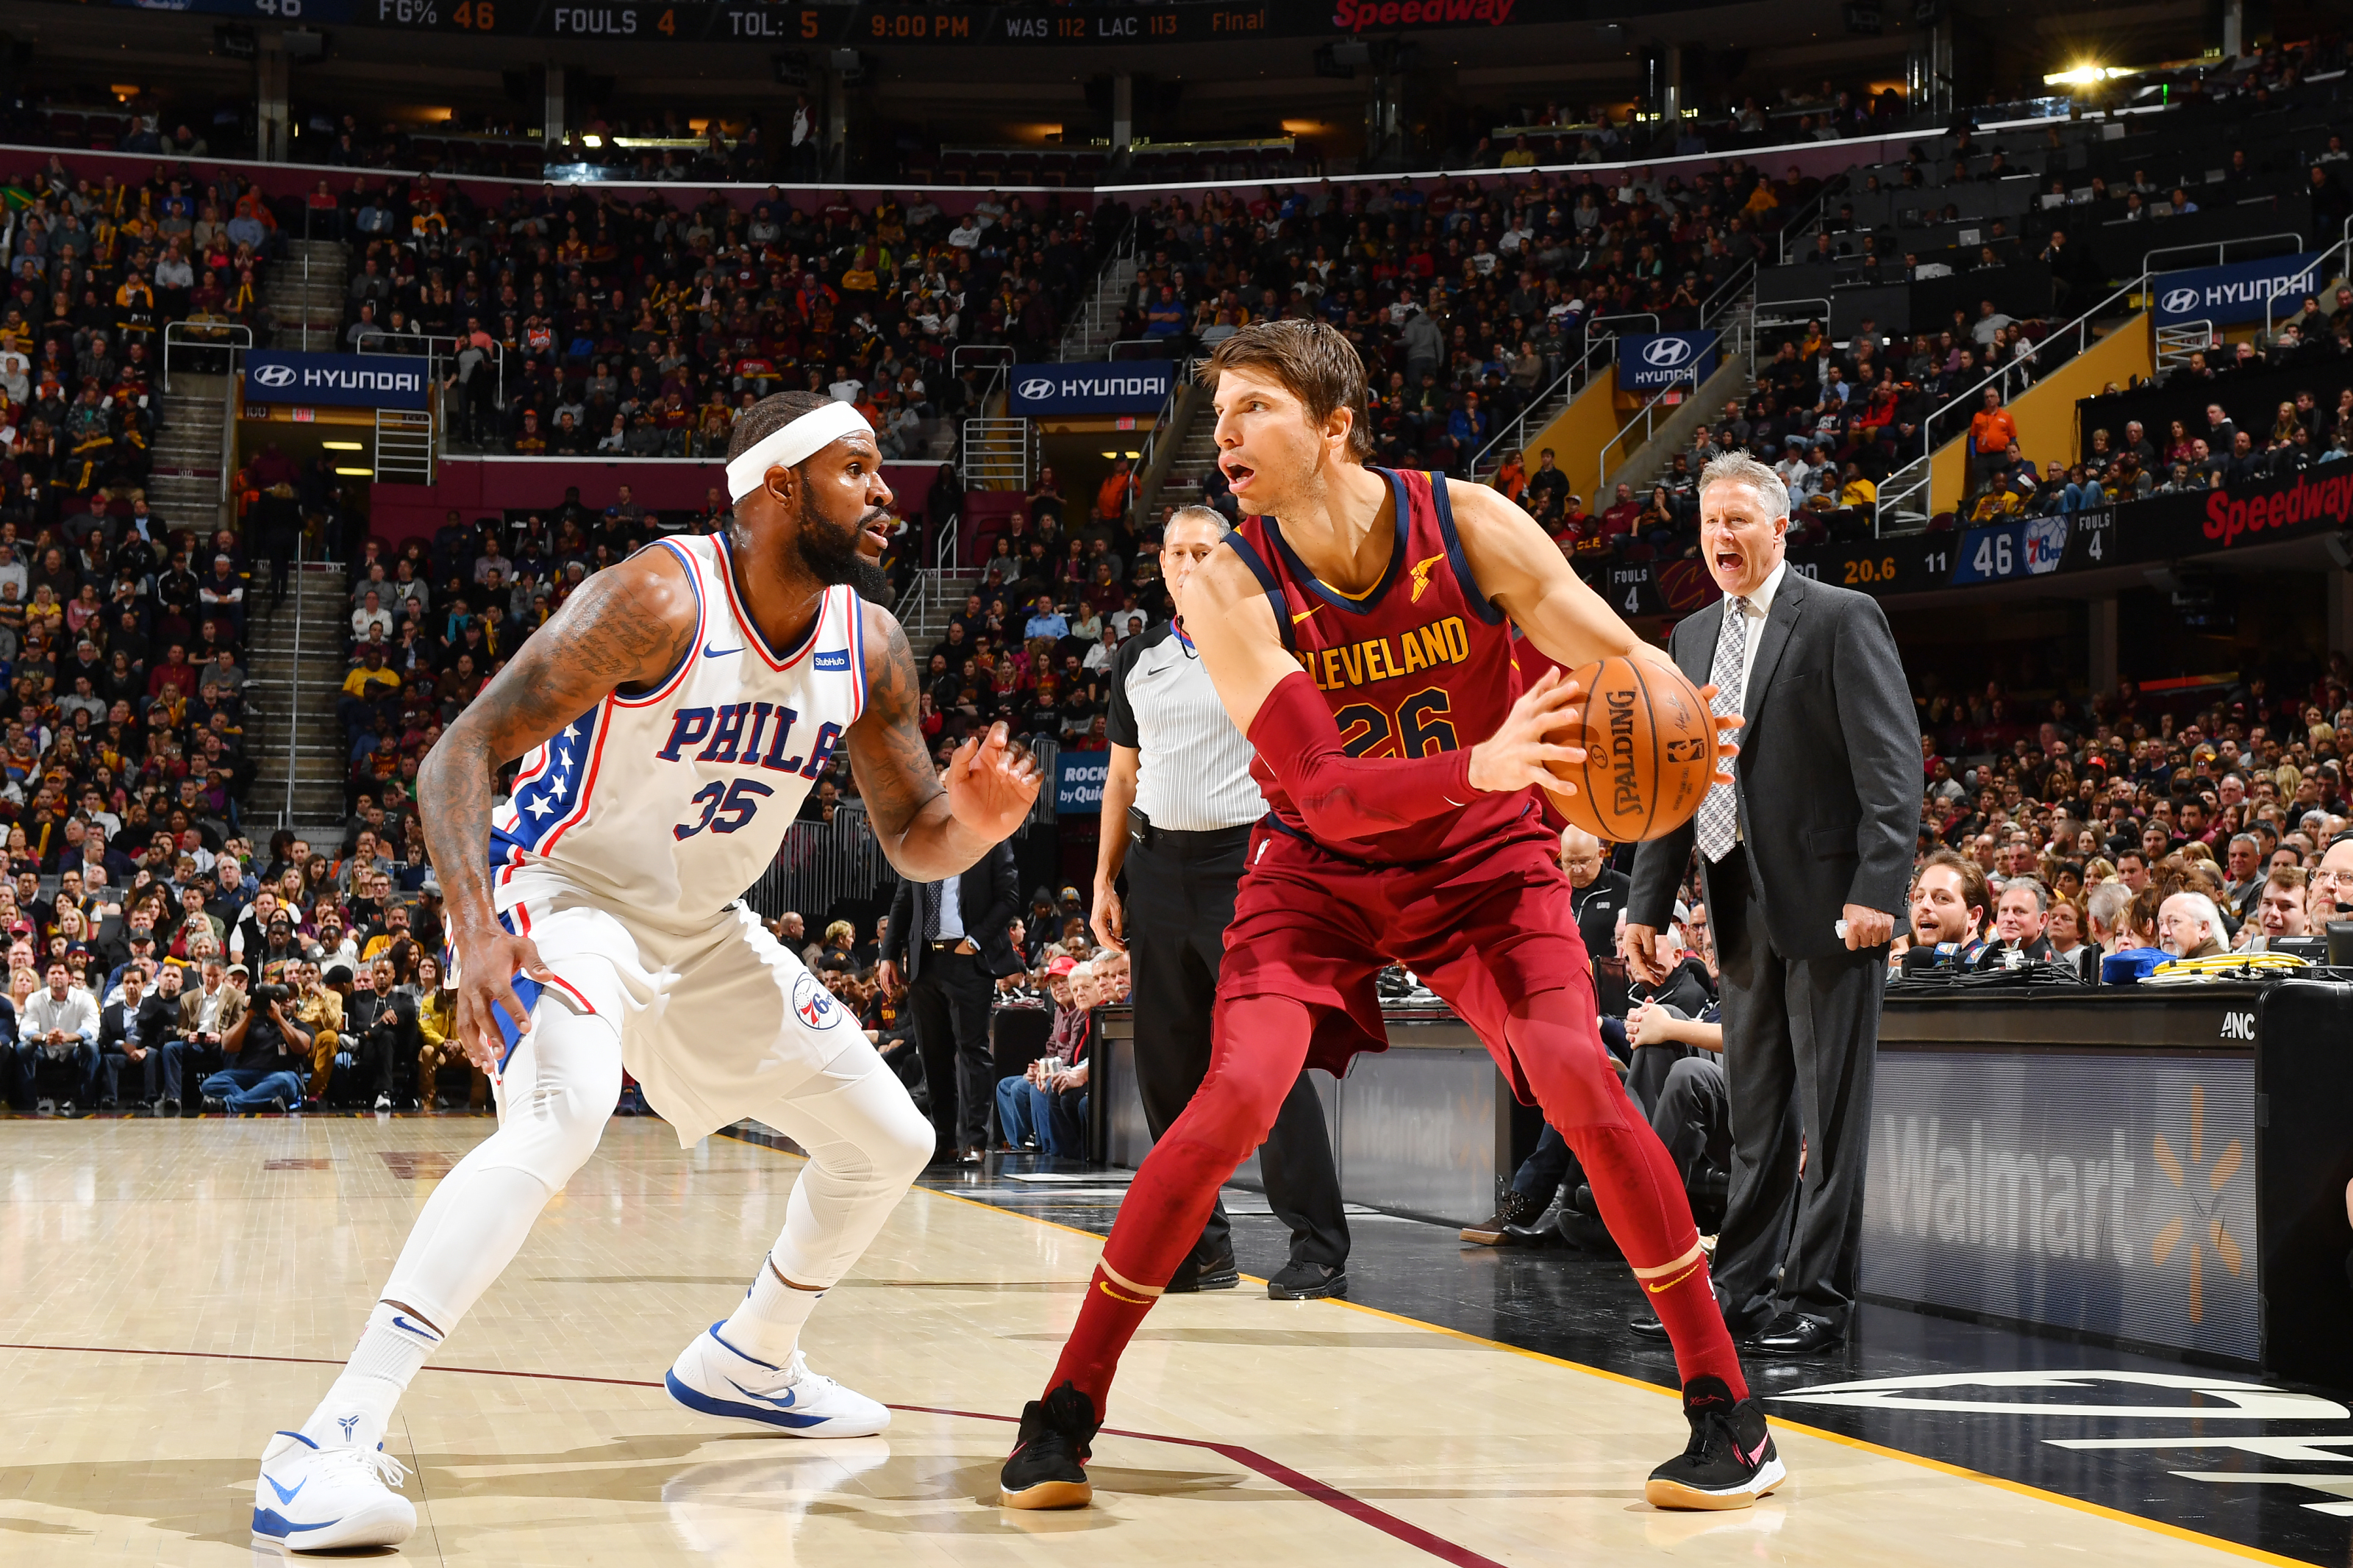 Could the Sixers get Kyle Korver to replace JJ Redick?